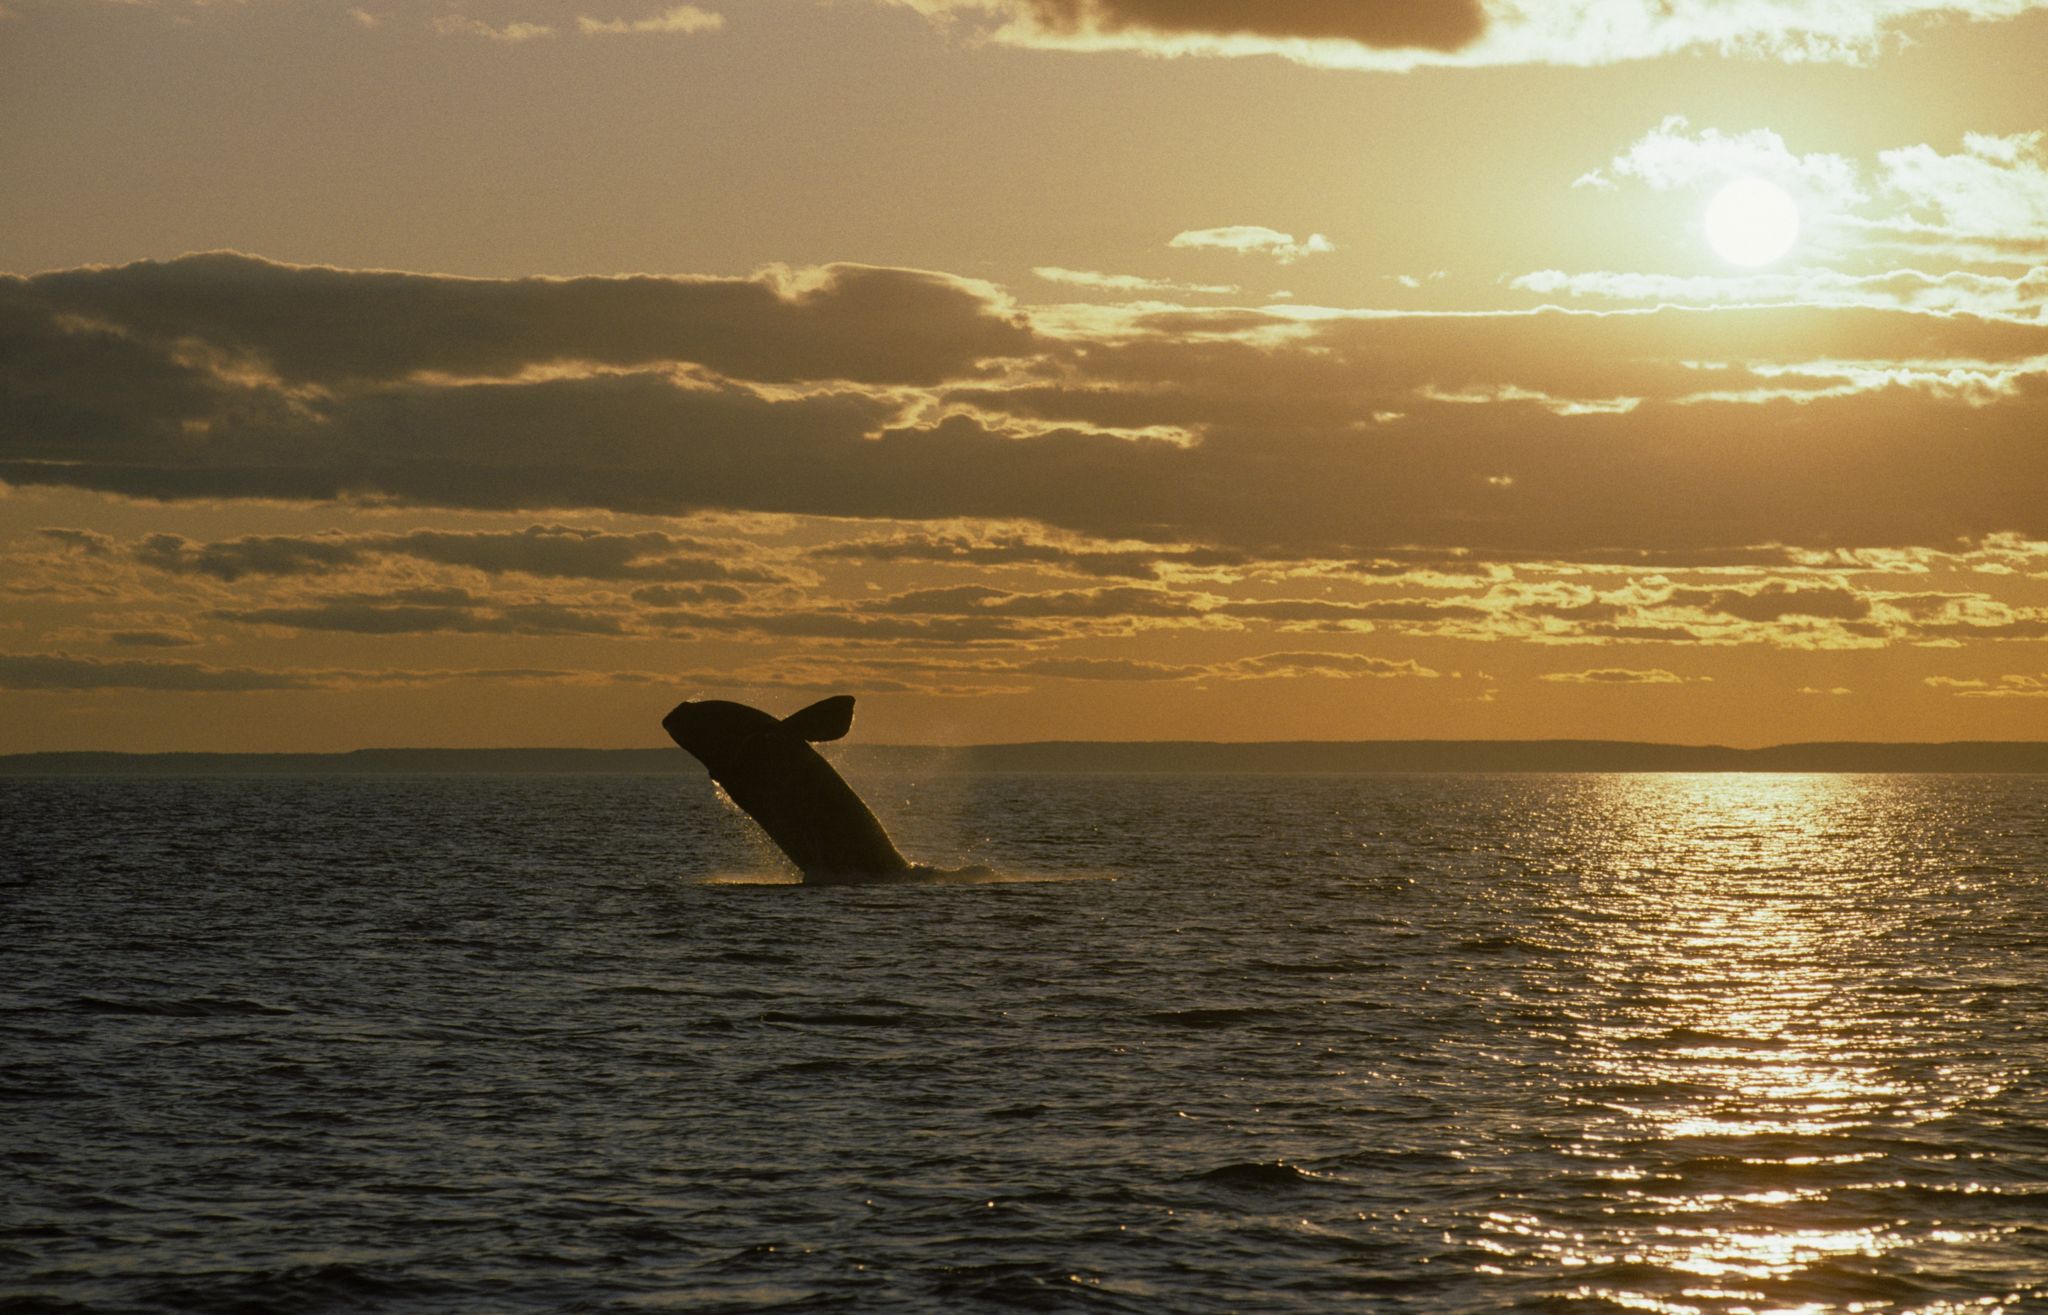 A North Atlantic right whale breaches the waters in the Bay of Fundy at sunset.